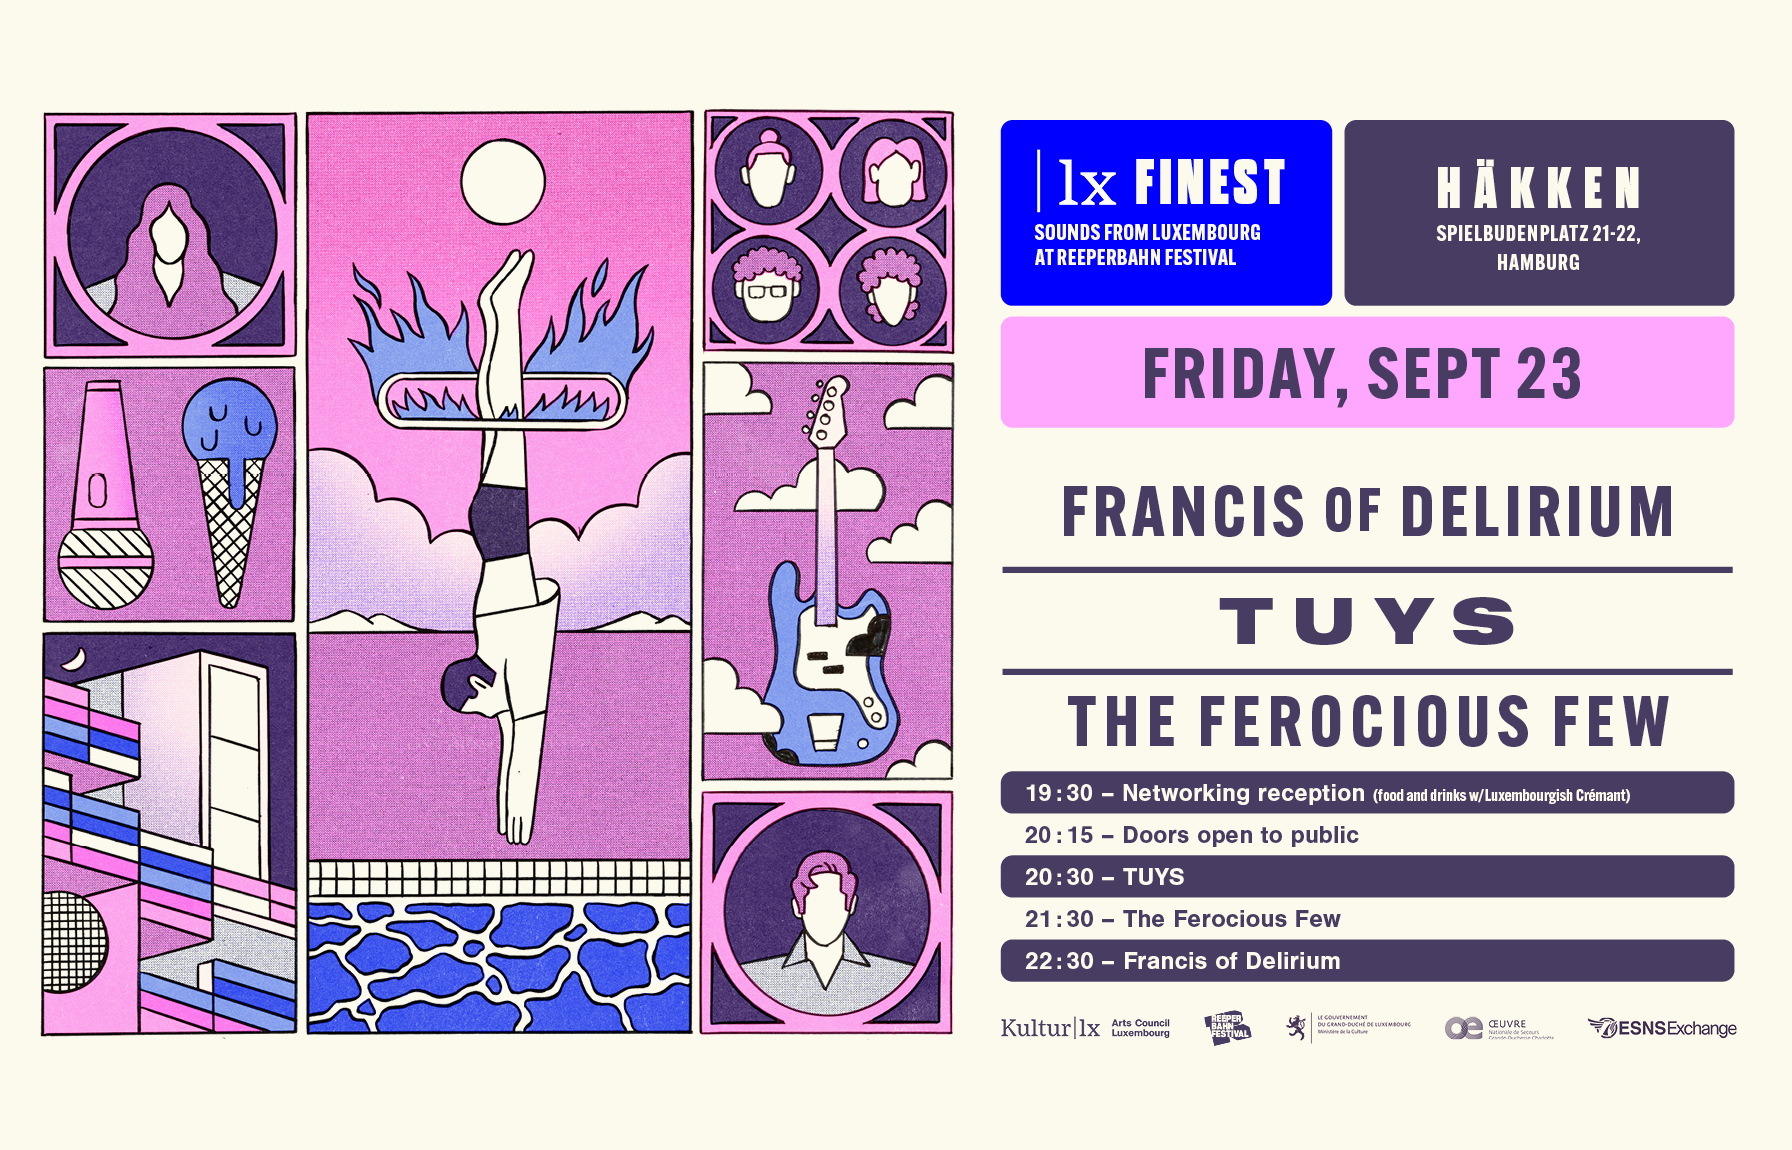 |lx finest - Sounds from Luxembourg au Reeperbahn Festival 2022